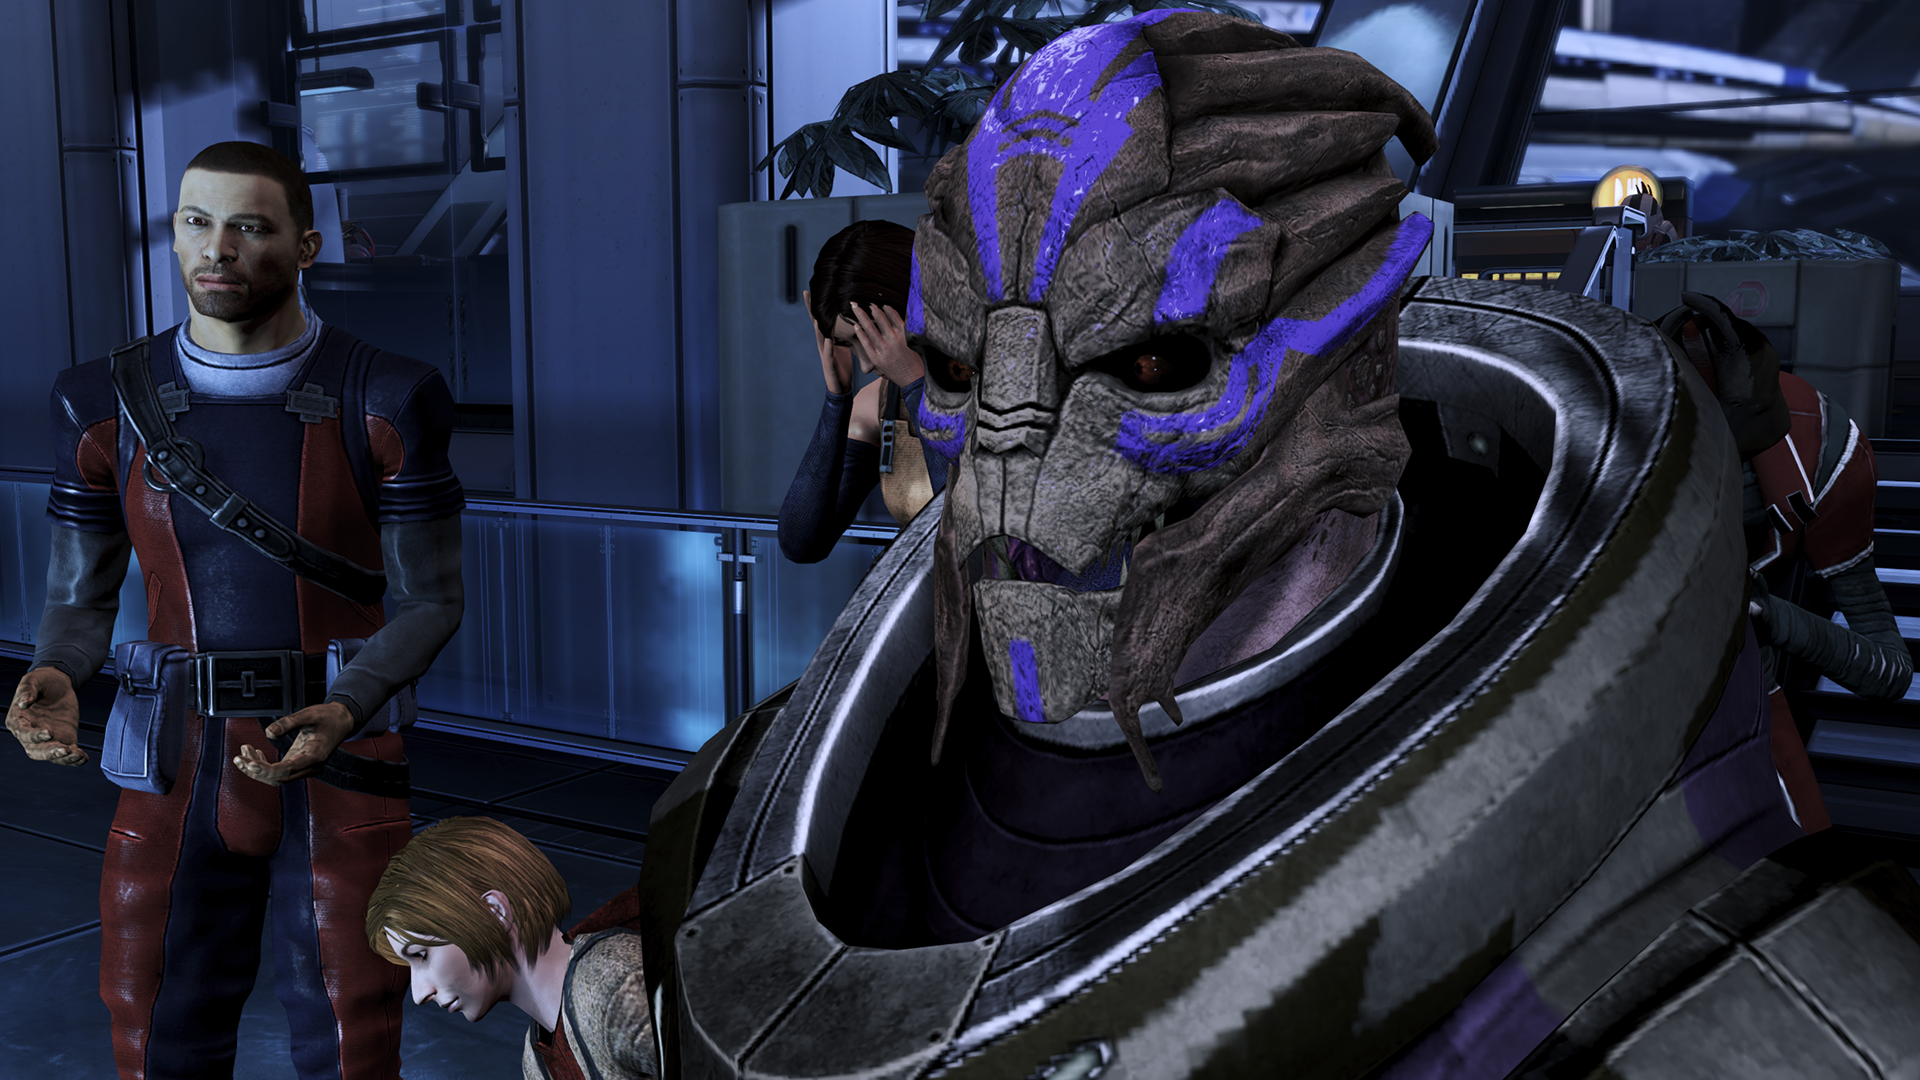 http://vignette2.wikia.nocookie.net/masseffect/images/2/2f/Citadel_-_tactus_and_guys.png/revision/latest?cb=20121114133317